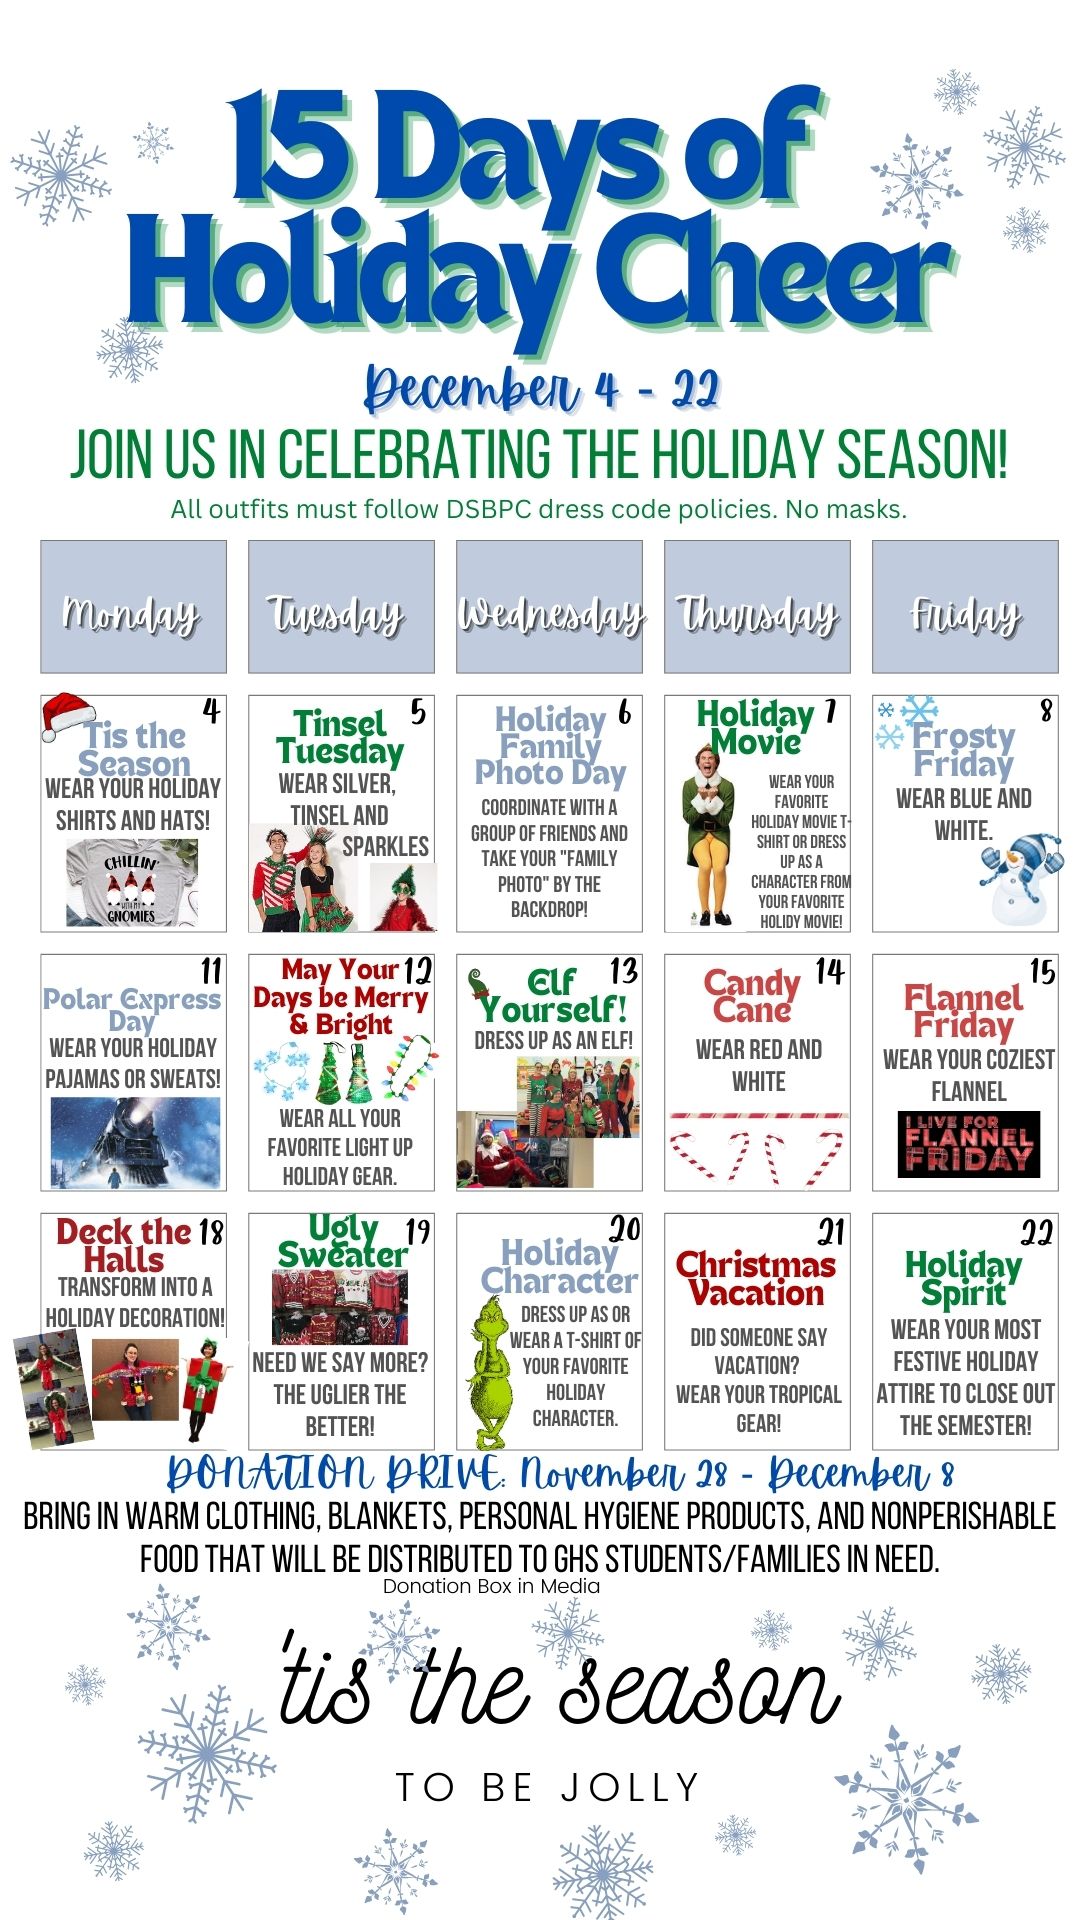 15 Days of Holiday Cheer!